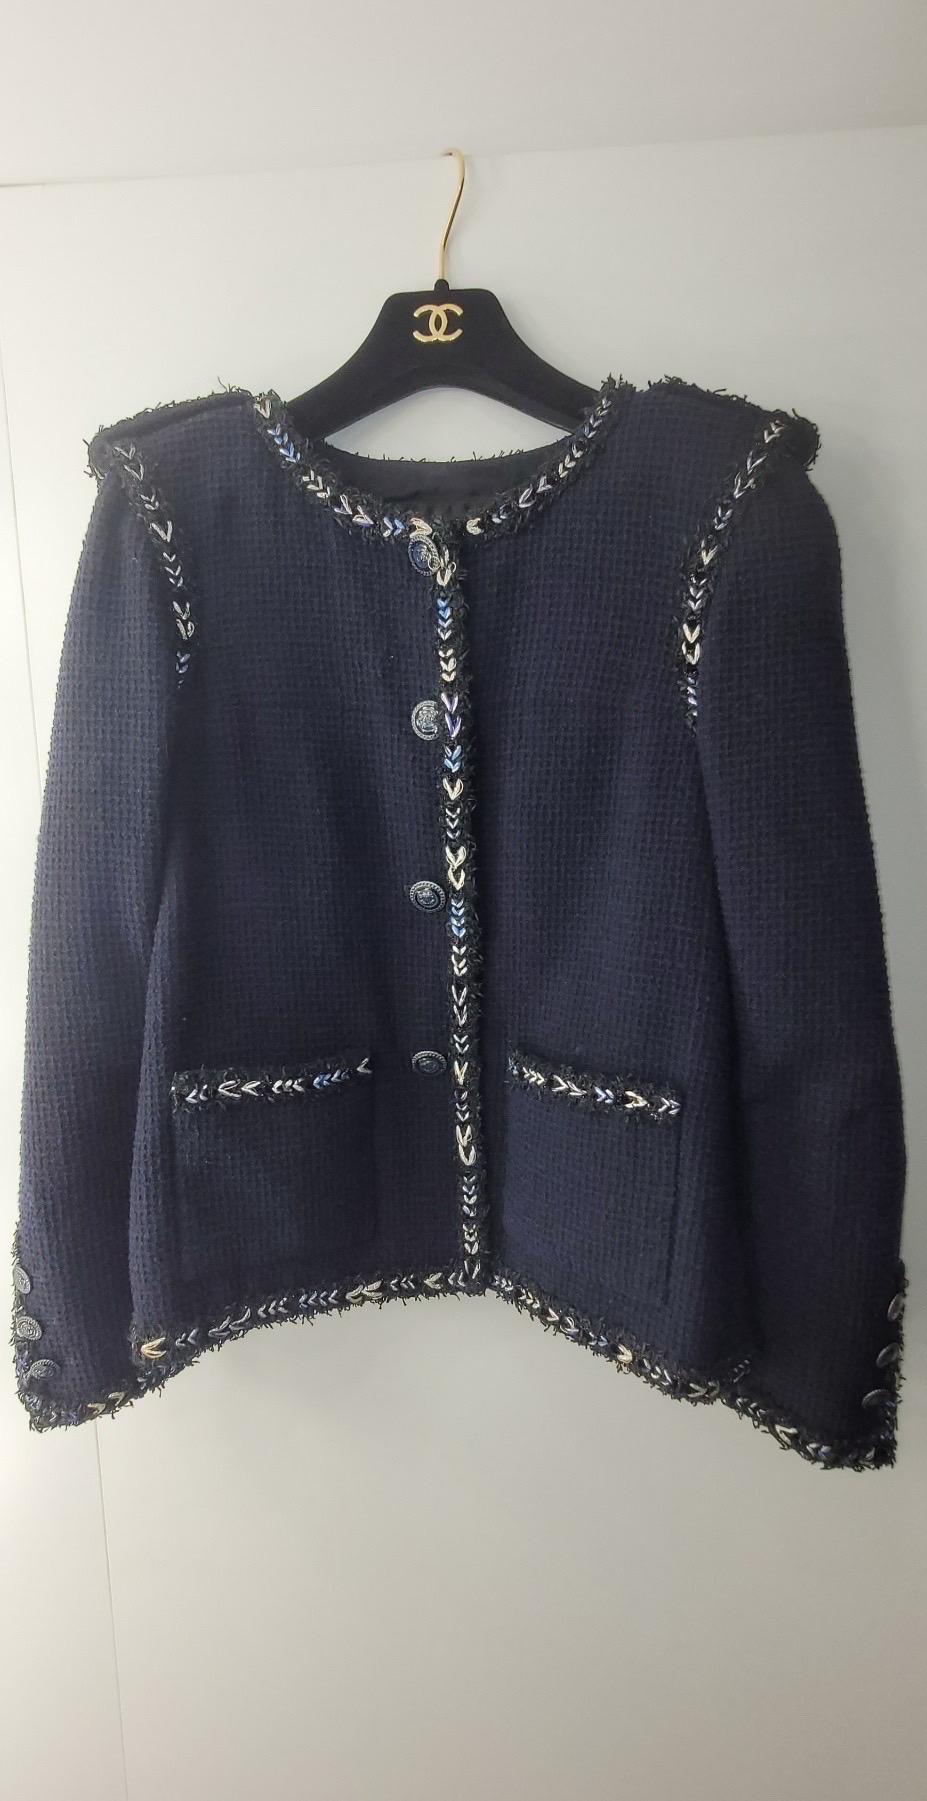 Iconic Chanel little tweed jacket with epaulettes from 2016 Spring Collection by Karl Lagerfeld. 

Retail price 7,560 $. 

Size mark 36fr. 


· made of navy blue most wanted Lesage tweed featuring signature braided metallic fringe trim throughout

·